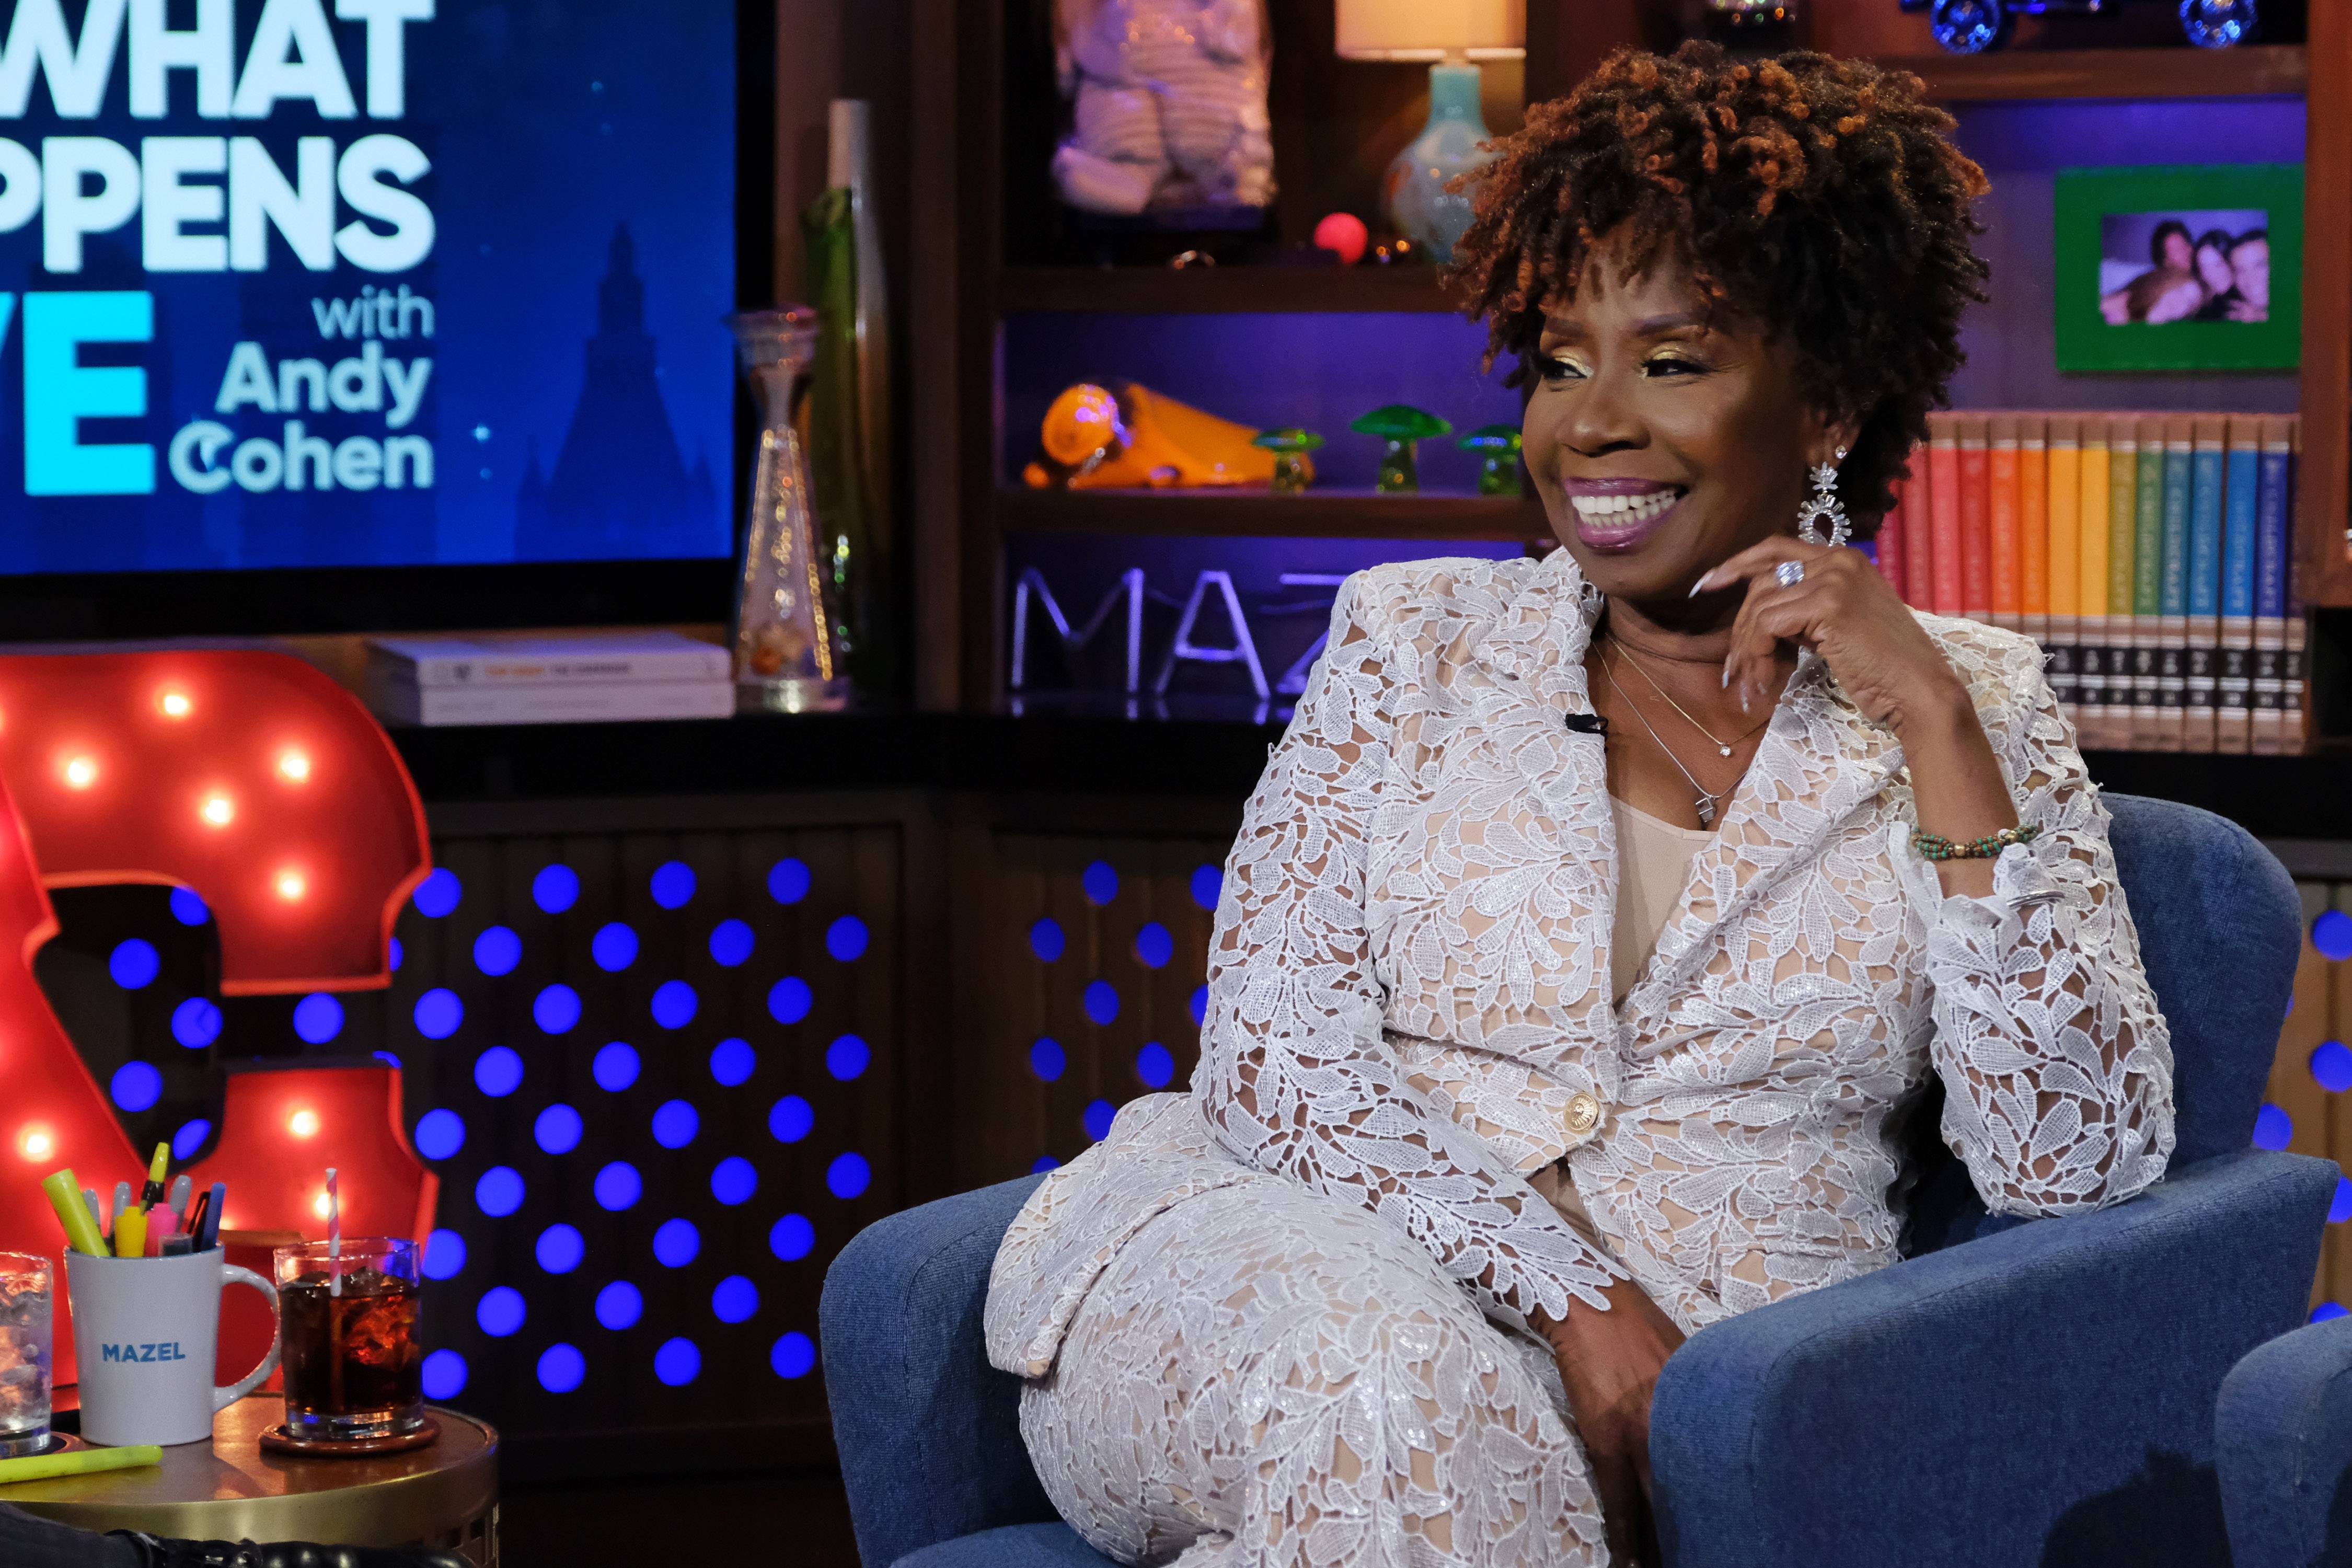 WATCH WHAT HAPPENS LIVE WITH ANDY COHEN -- Episode 16166 -- Pictured: Iyanla Vanzant -- (Photo by: Charles Sykes/Bravo/NBCU Photo Bank)